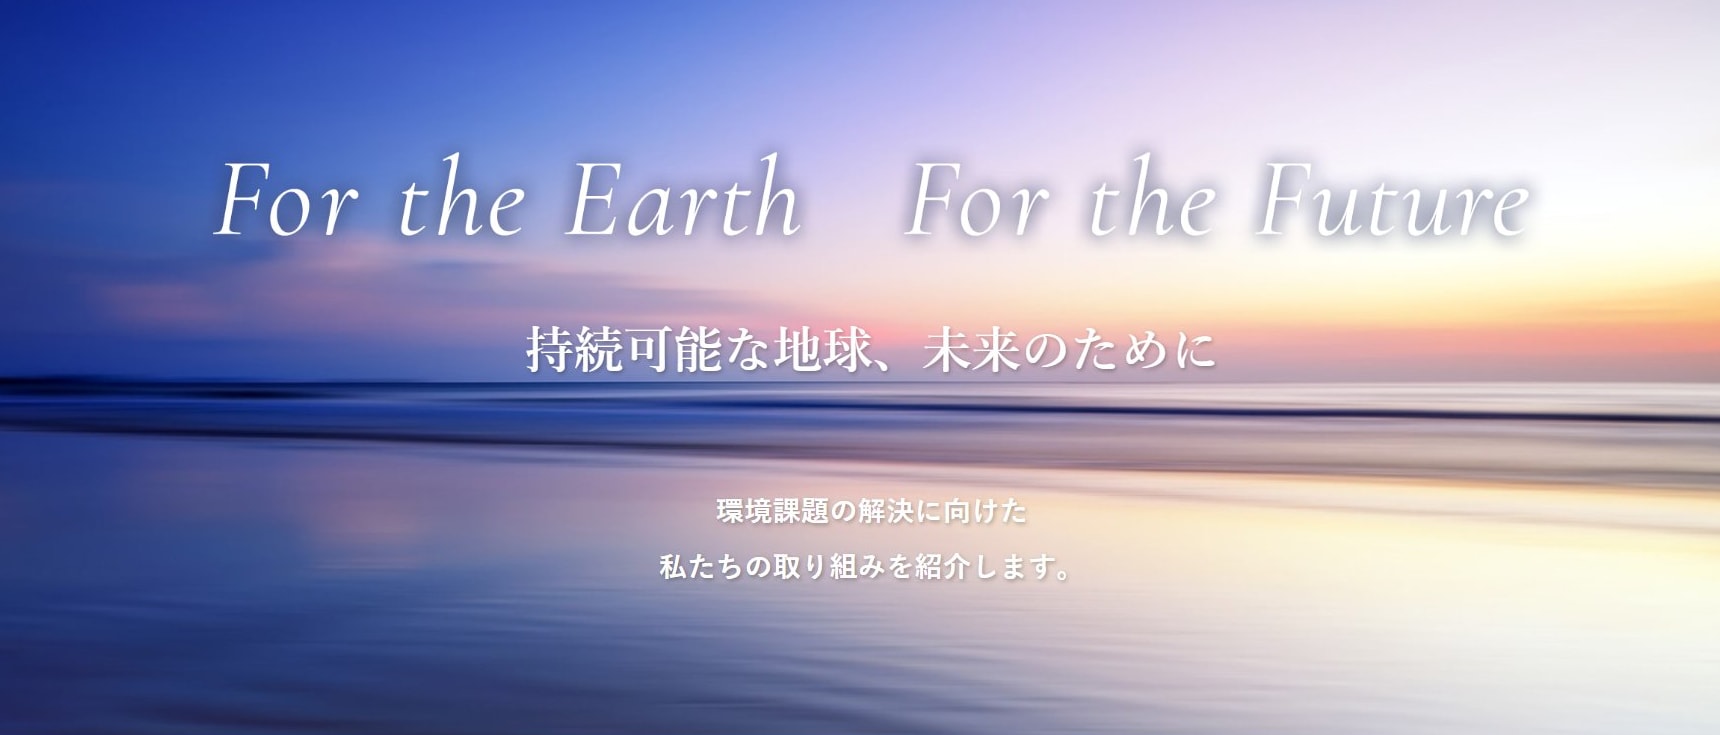 For the Earth For the Future